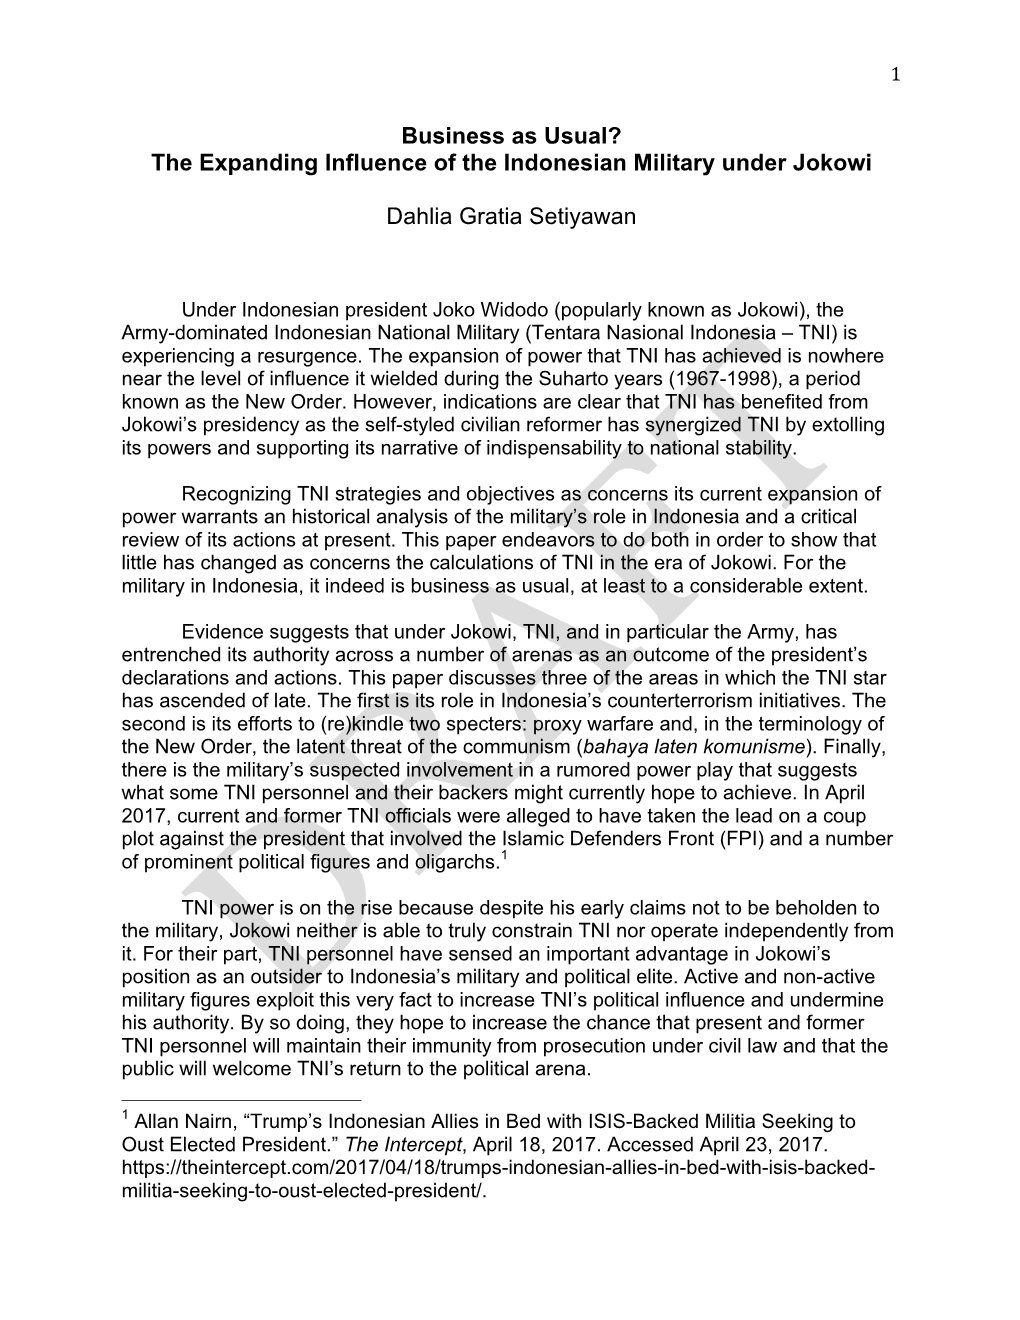 The Expanding Influence of the Indonesian Military Under Jokowi